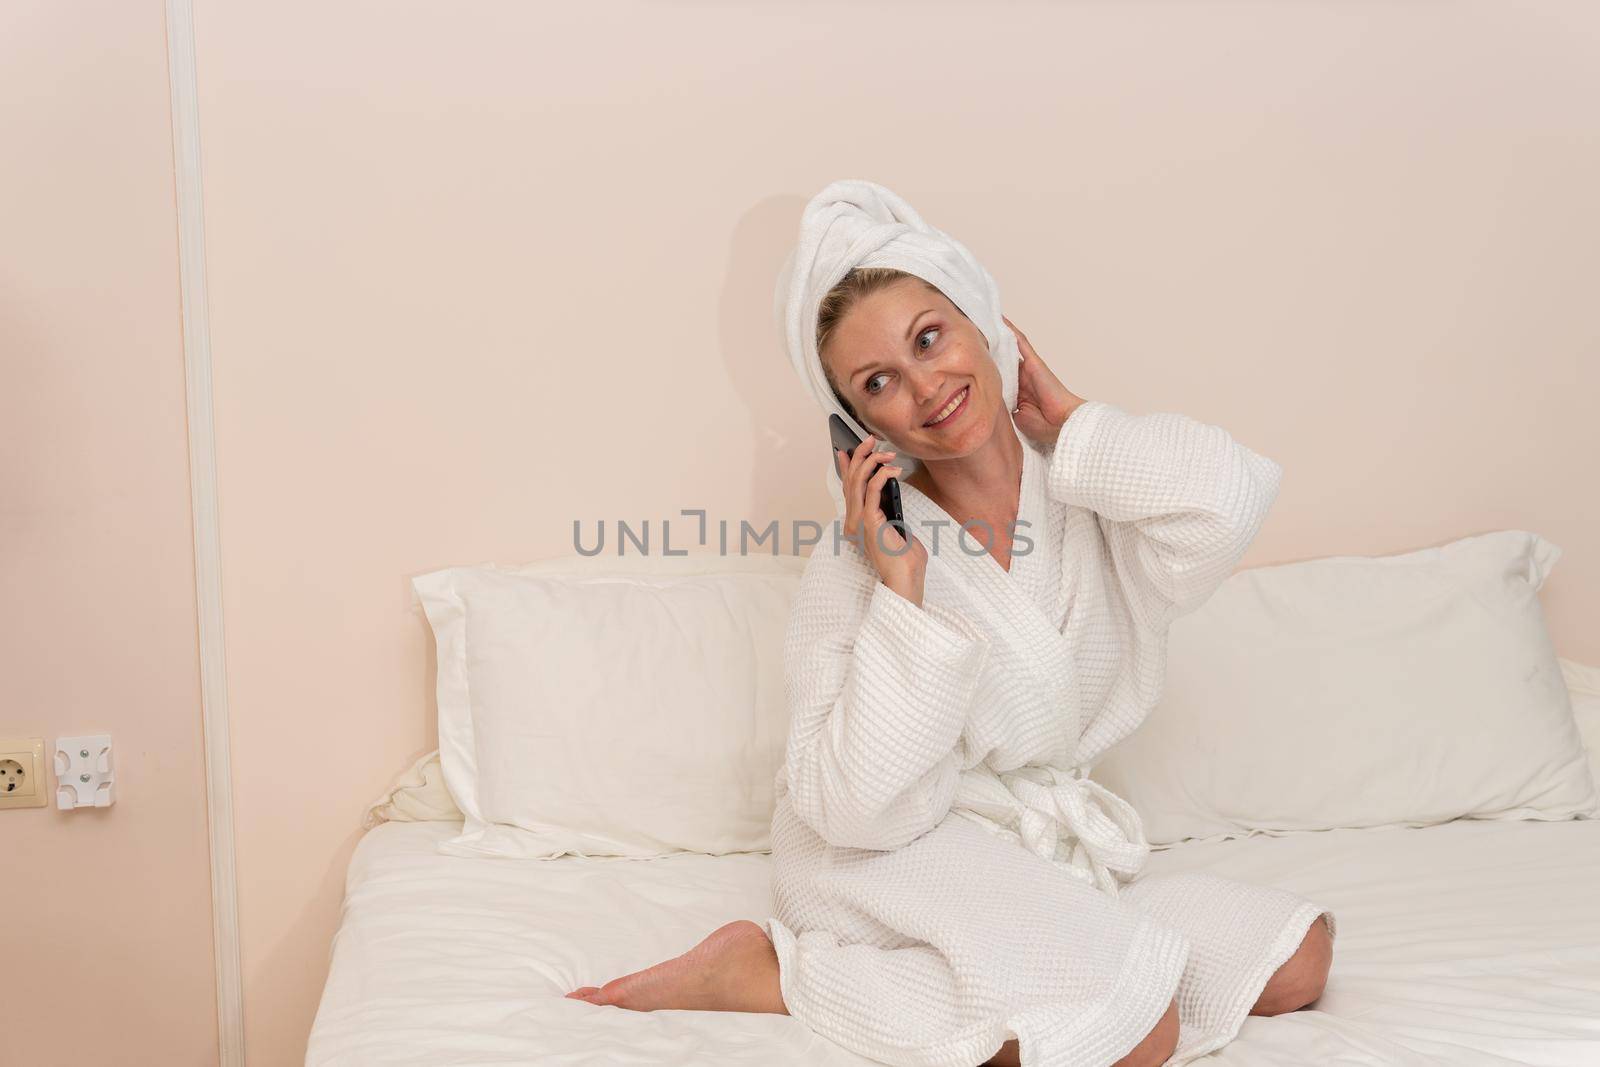 Cell female bed spa beauty copyspace bathrobe care hotel lady, concept preparing young from clean and towel skin, robe concept. Interior therapy positive, person